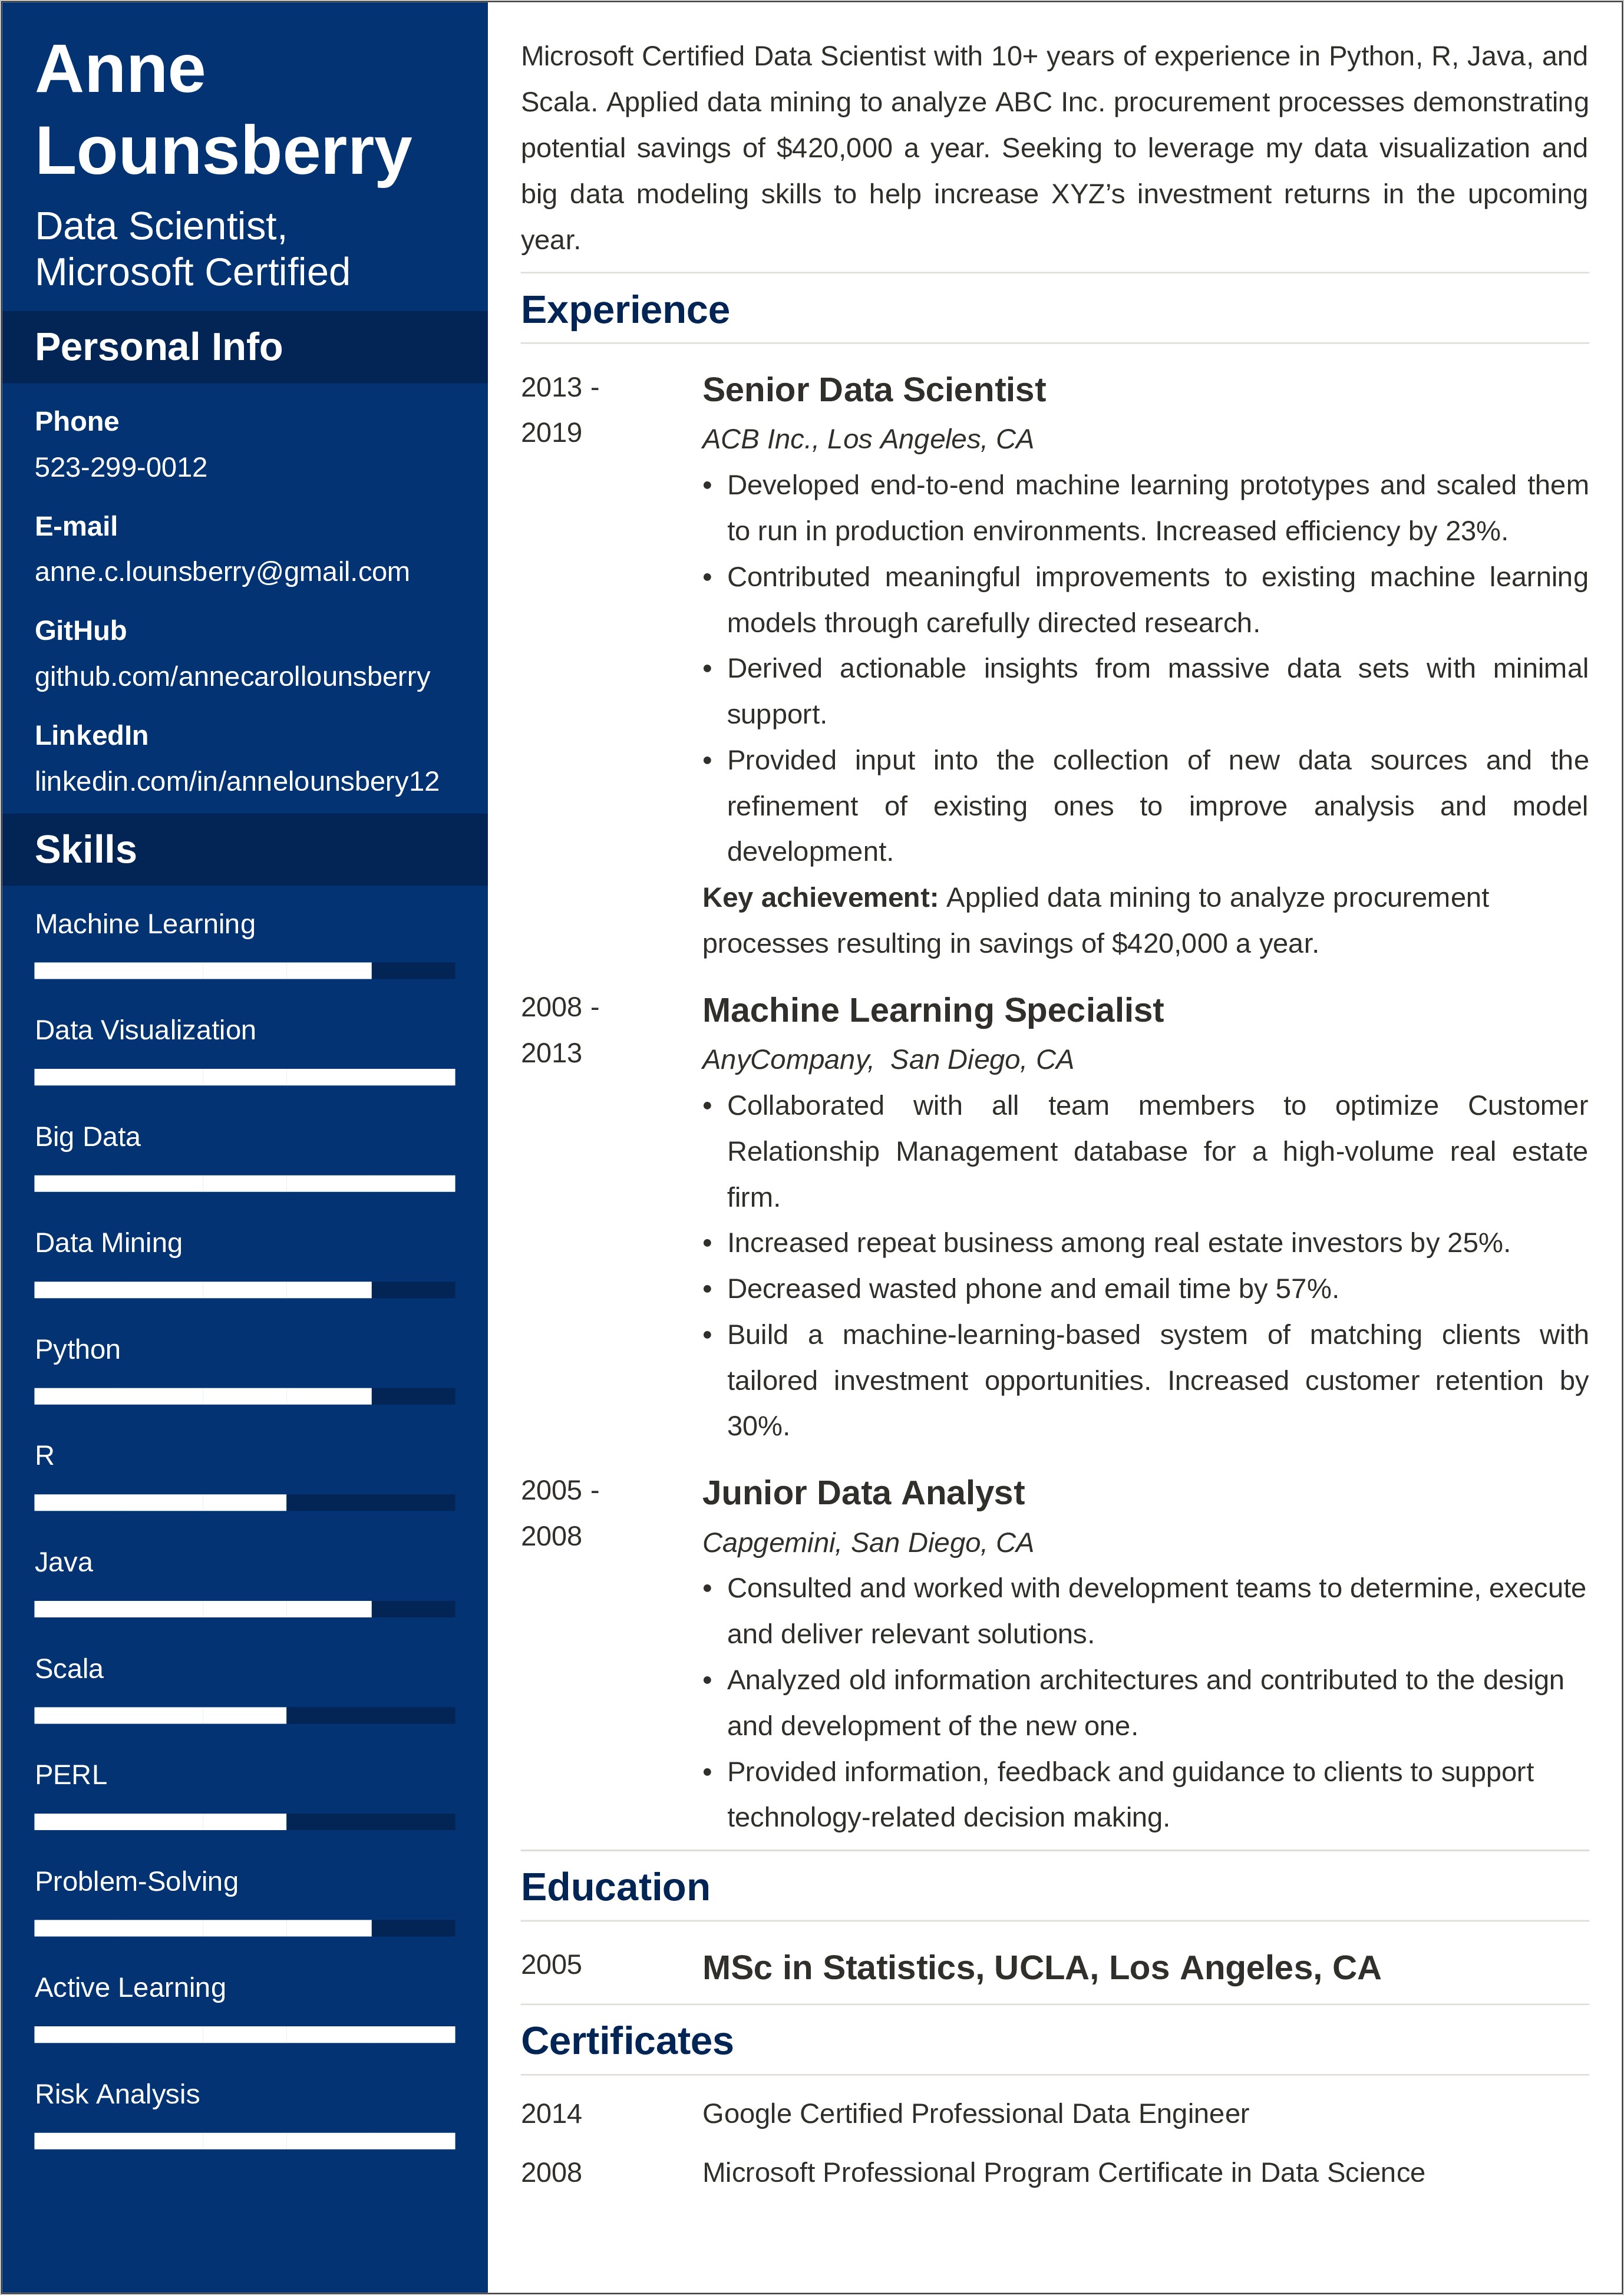 Skills Section Of Resume Accounting Reddit